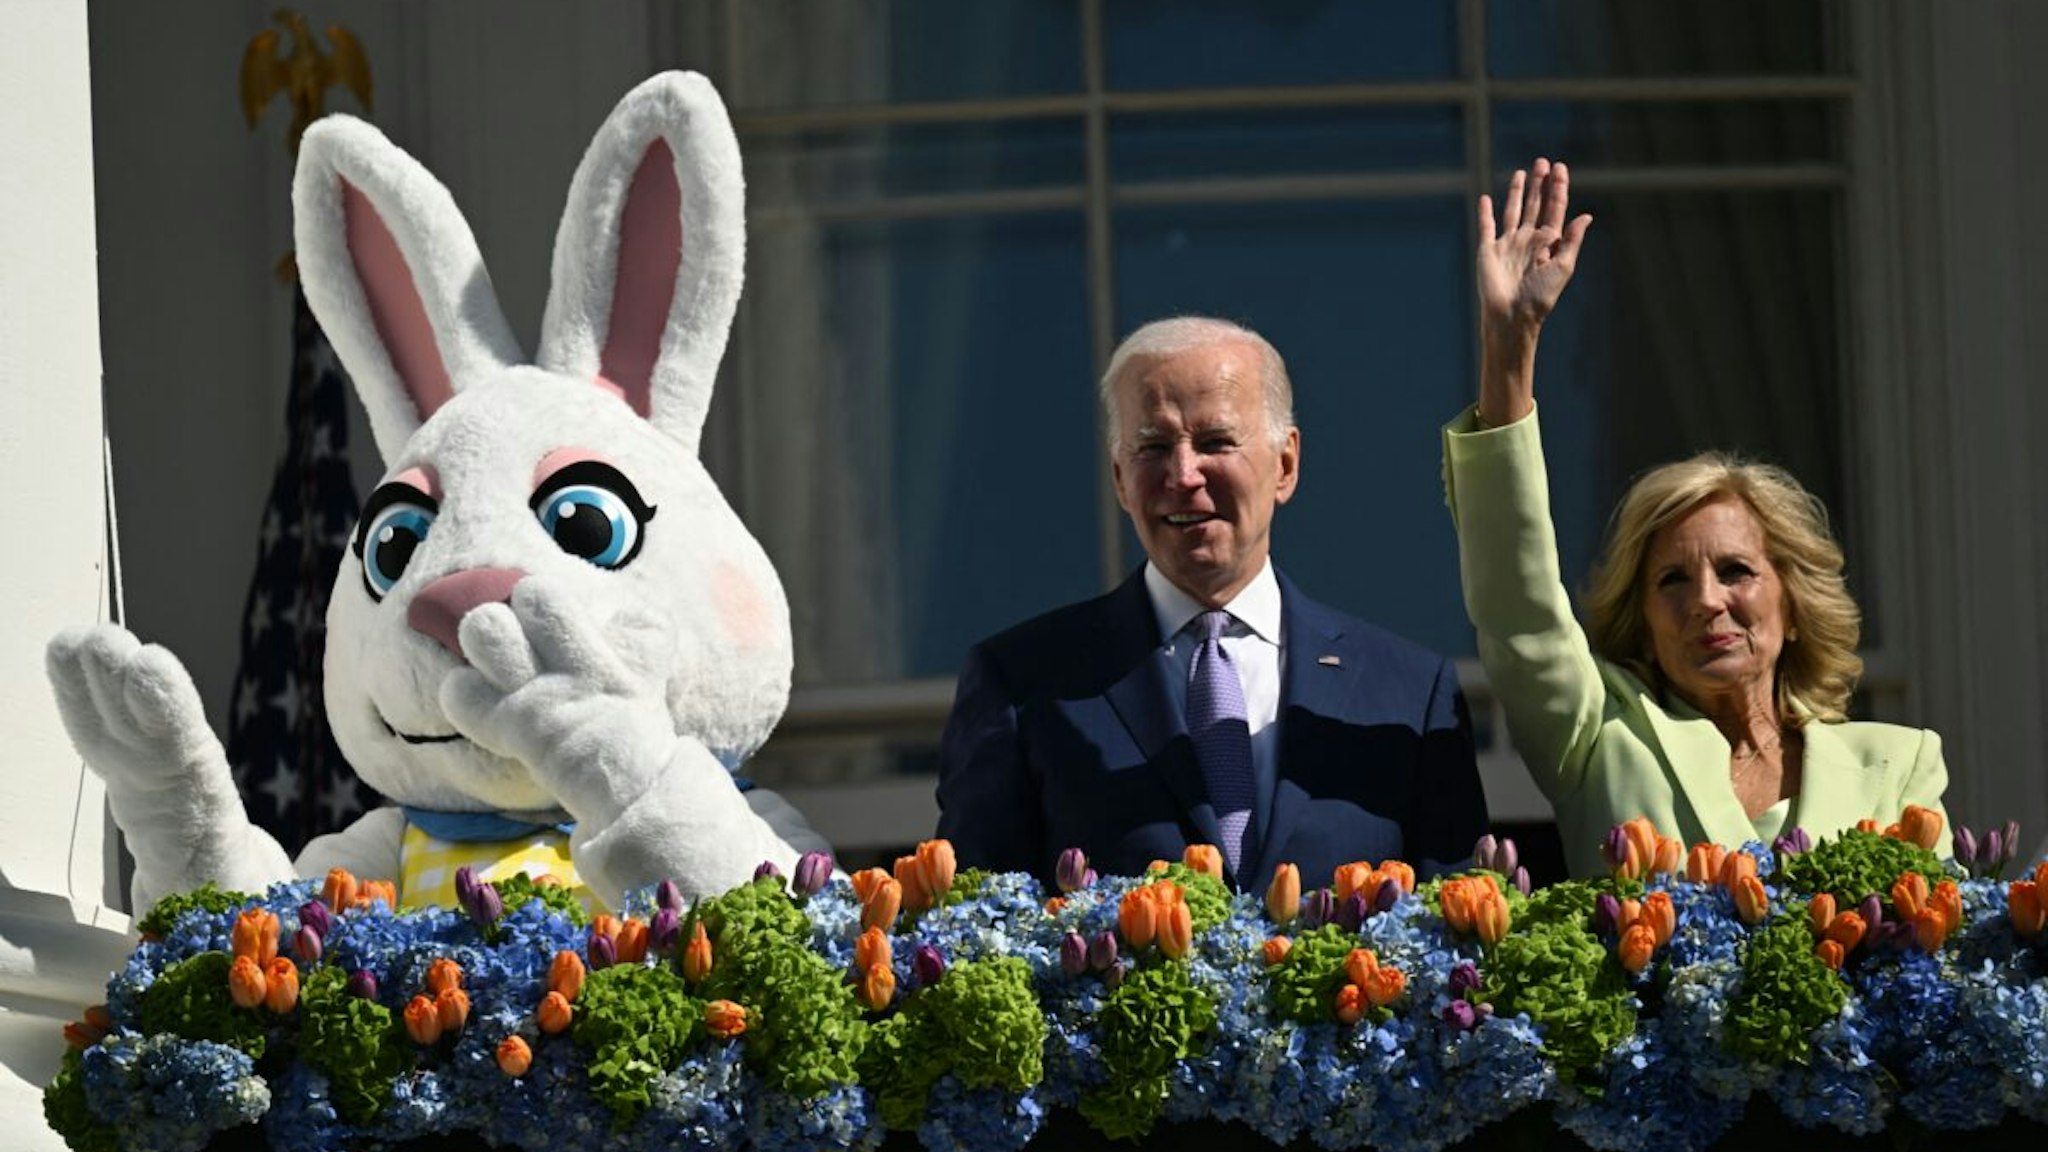 US President Joe Biden, alongside First Lady Jill Biden and the Easter Bunny (L), waves after speaking at the annual Easter Egg Roll on the South Lawn of the White House in Washington, DC, on April 10, 2023.